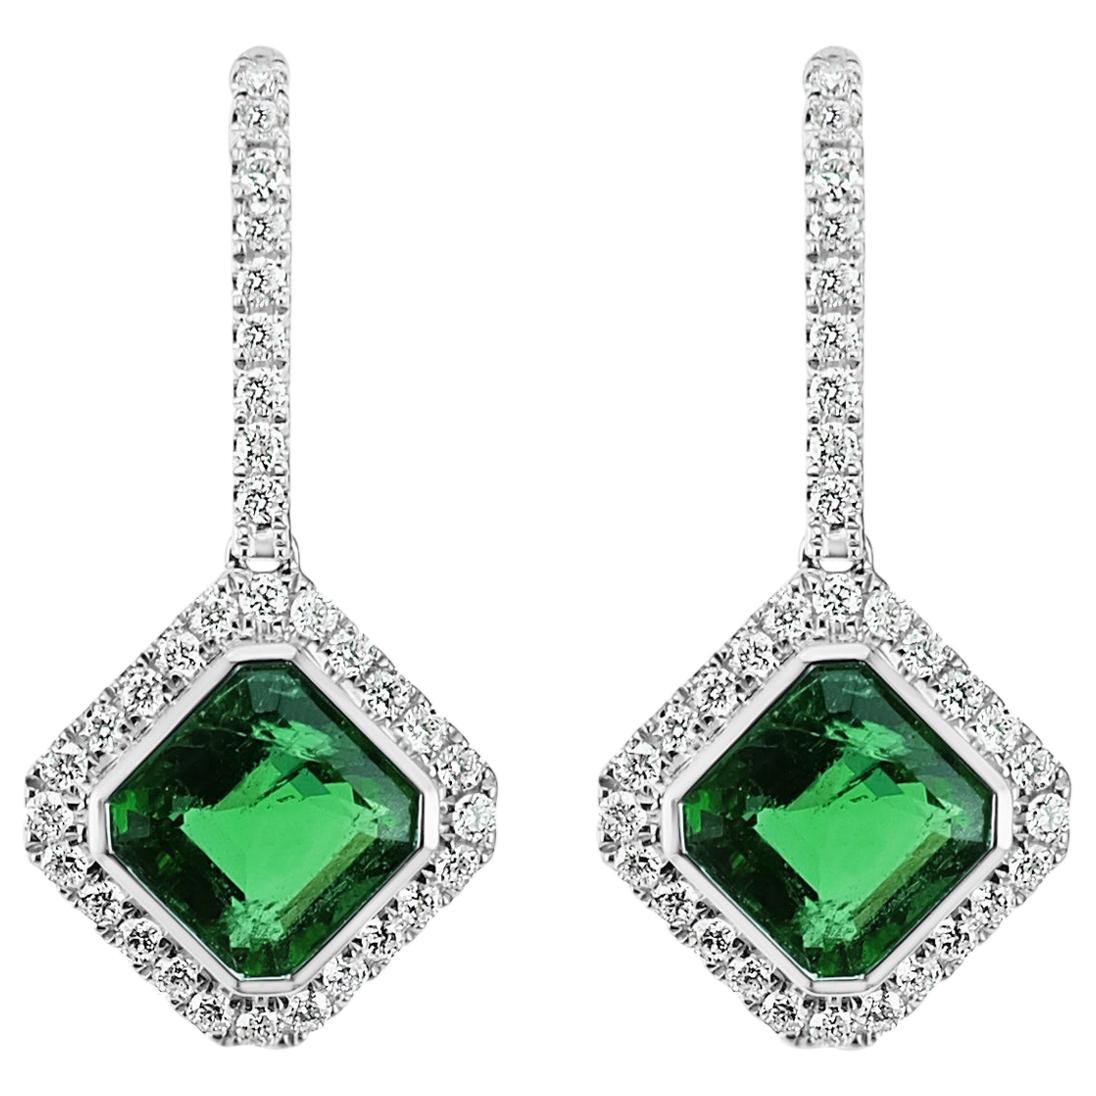 NGTC Certified 3.73 Carat Green Emerald and Diamond Classical Dangle Earring